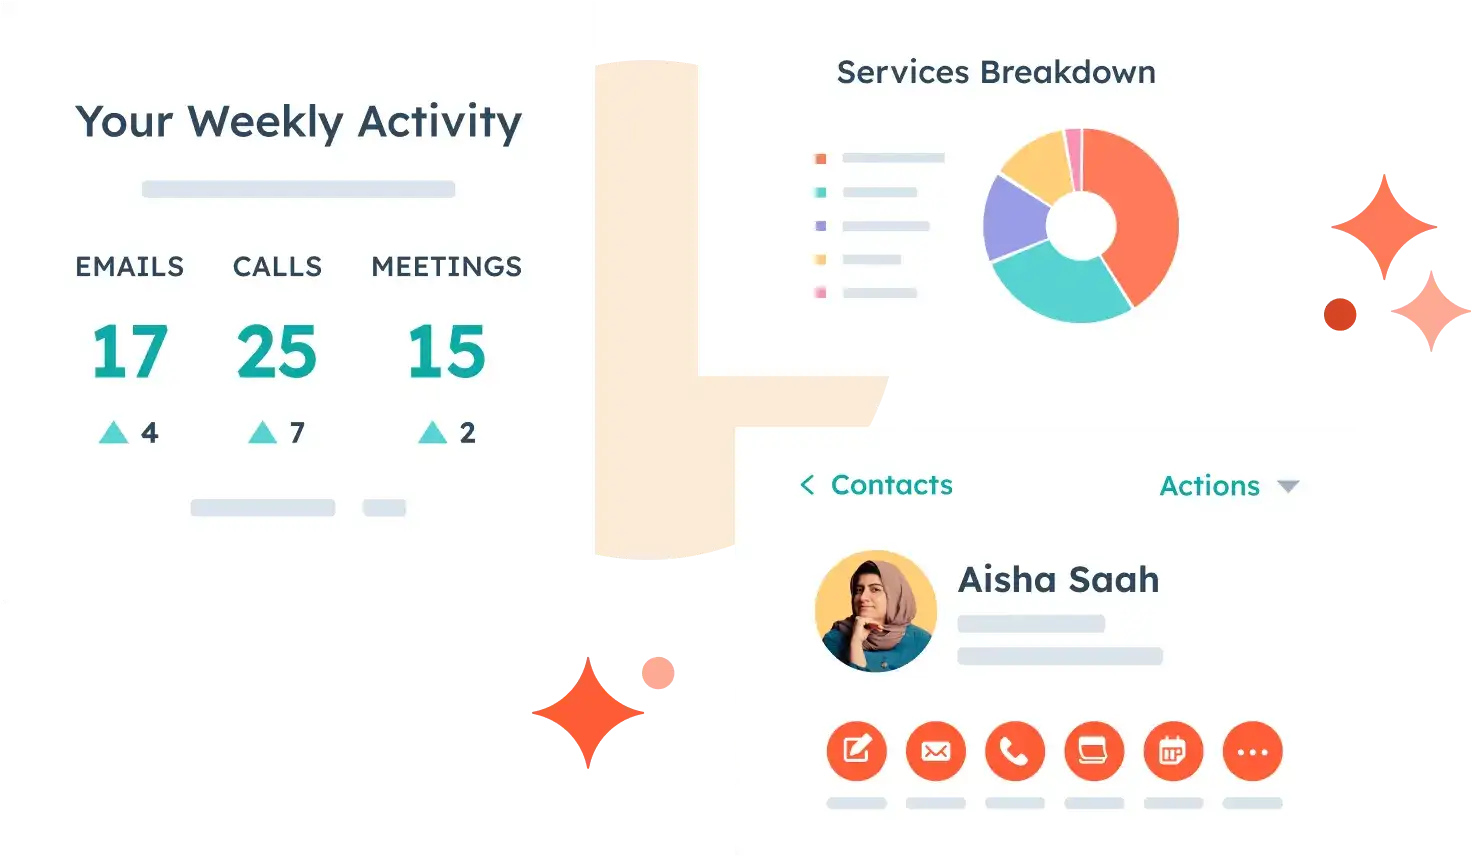 View of a HubSpot user's weekly email, calling, and meeting activity, a contact record, and a customer service report in their HubSpot customer platform